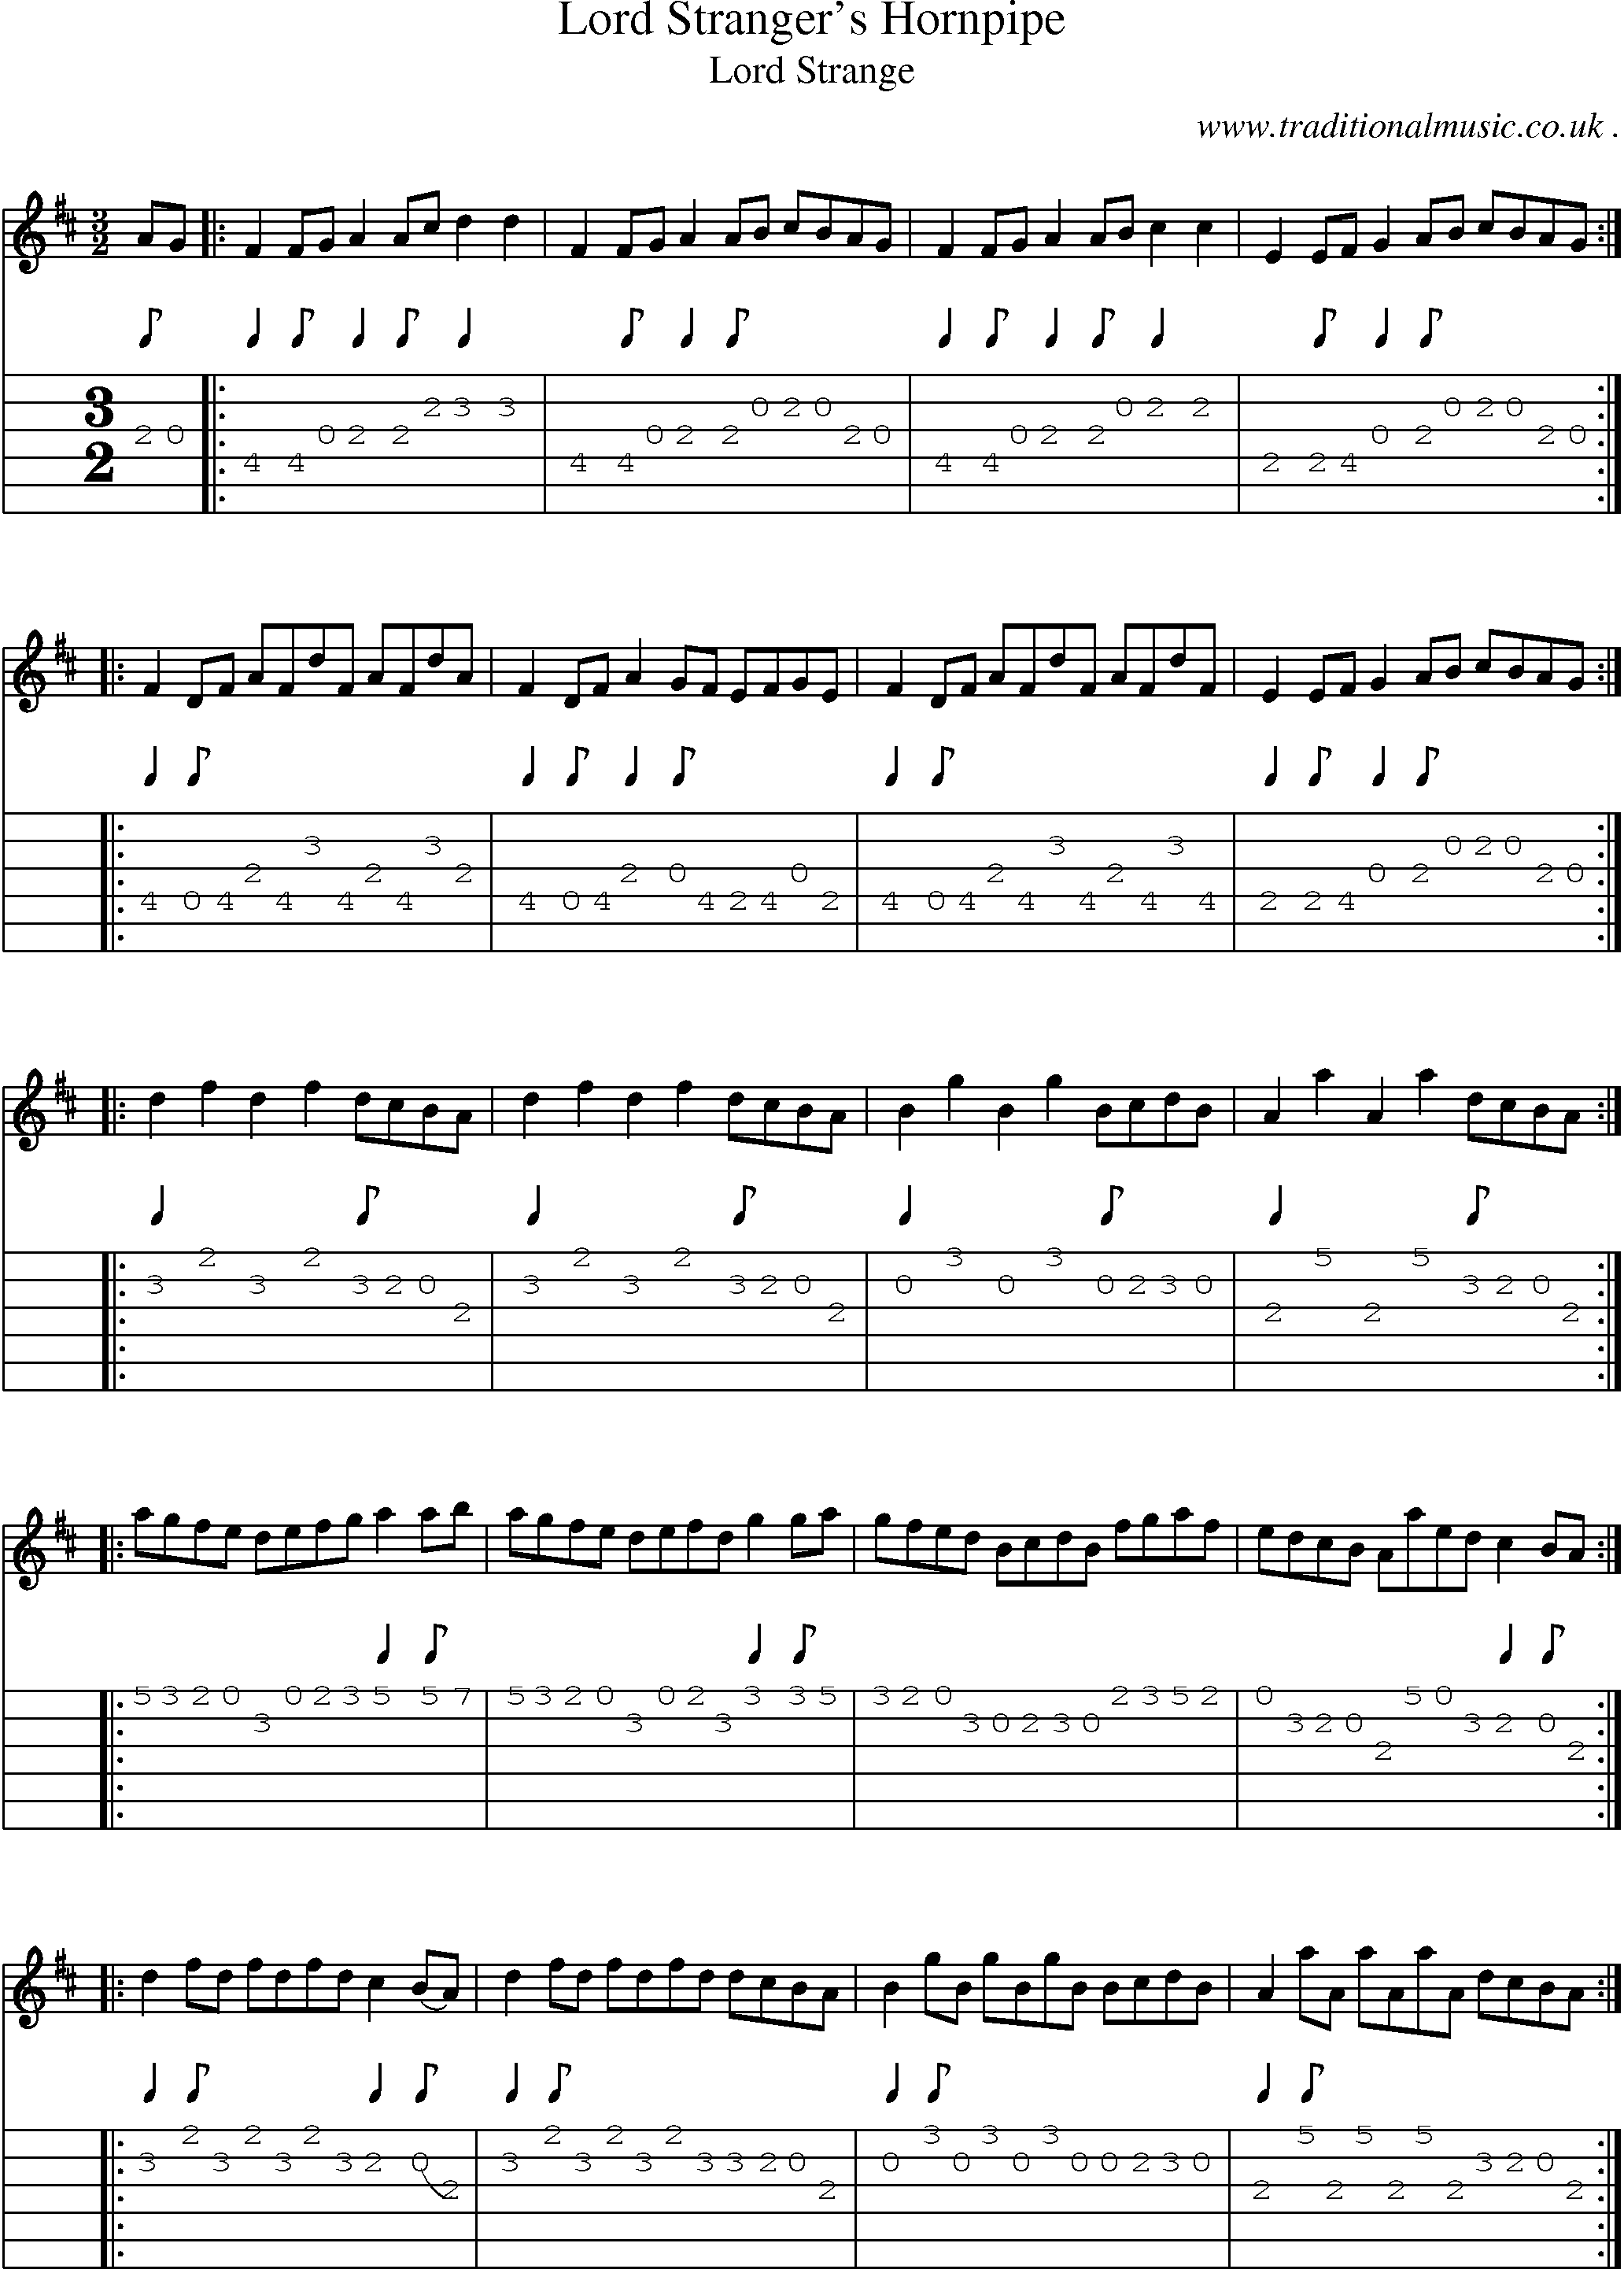 Sheet-Music and Guitar Tabs for Lord Strangers Hornpipe